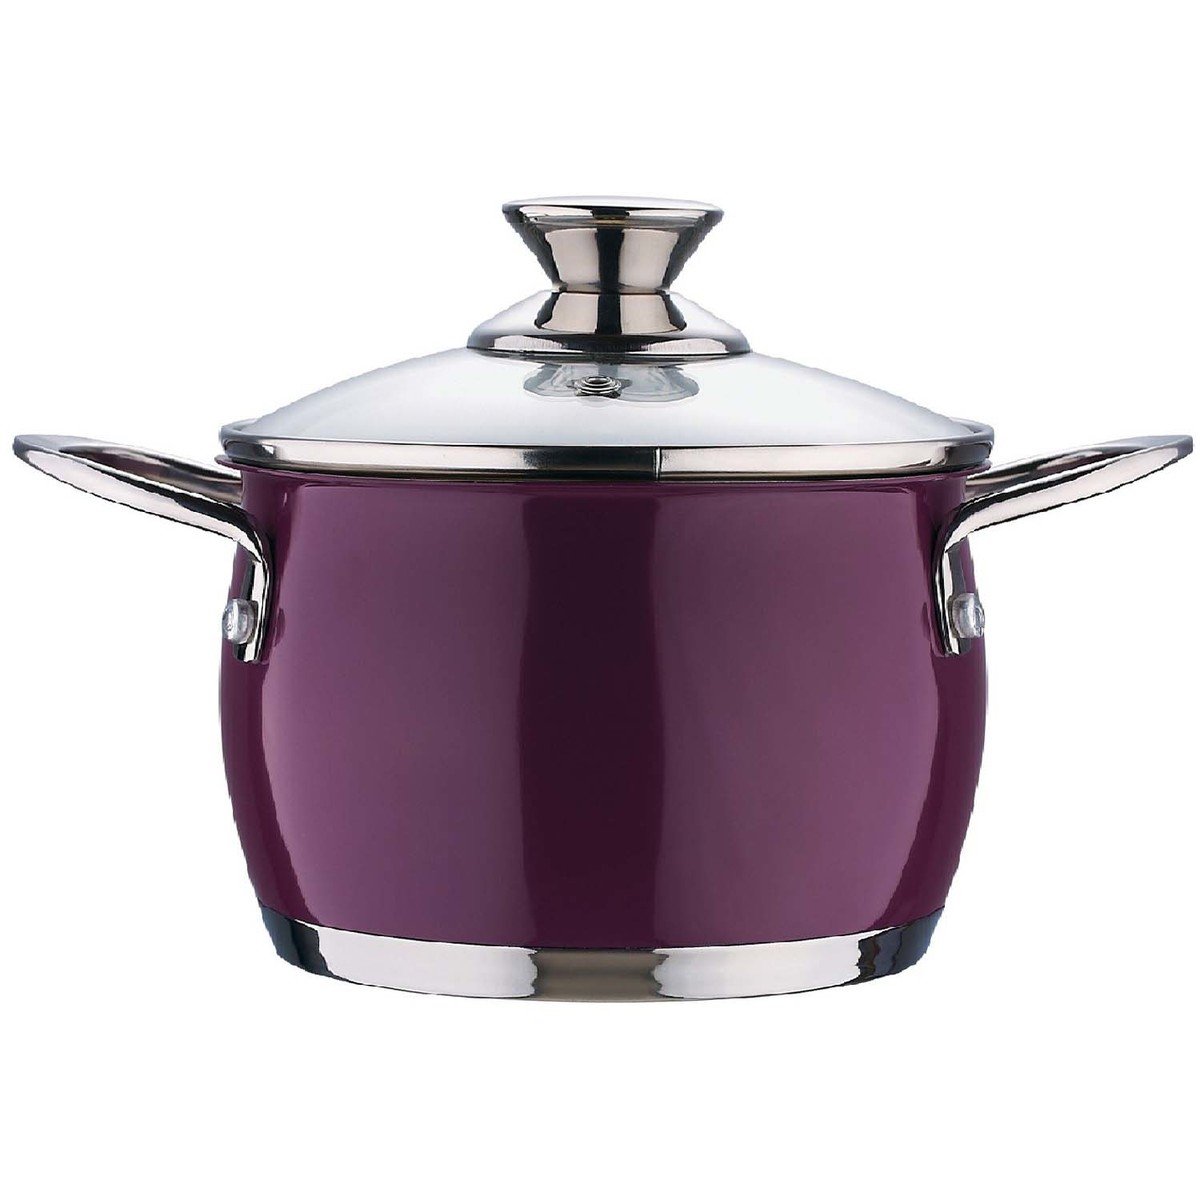 Bergner Stainless Steel Casserole 20cm Assorted Colors